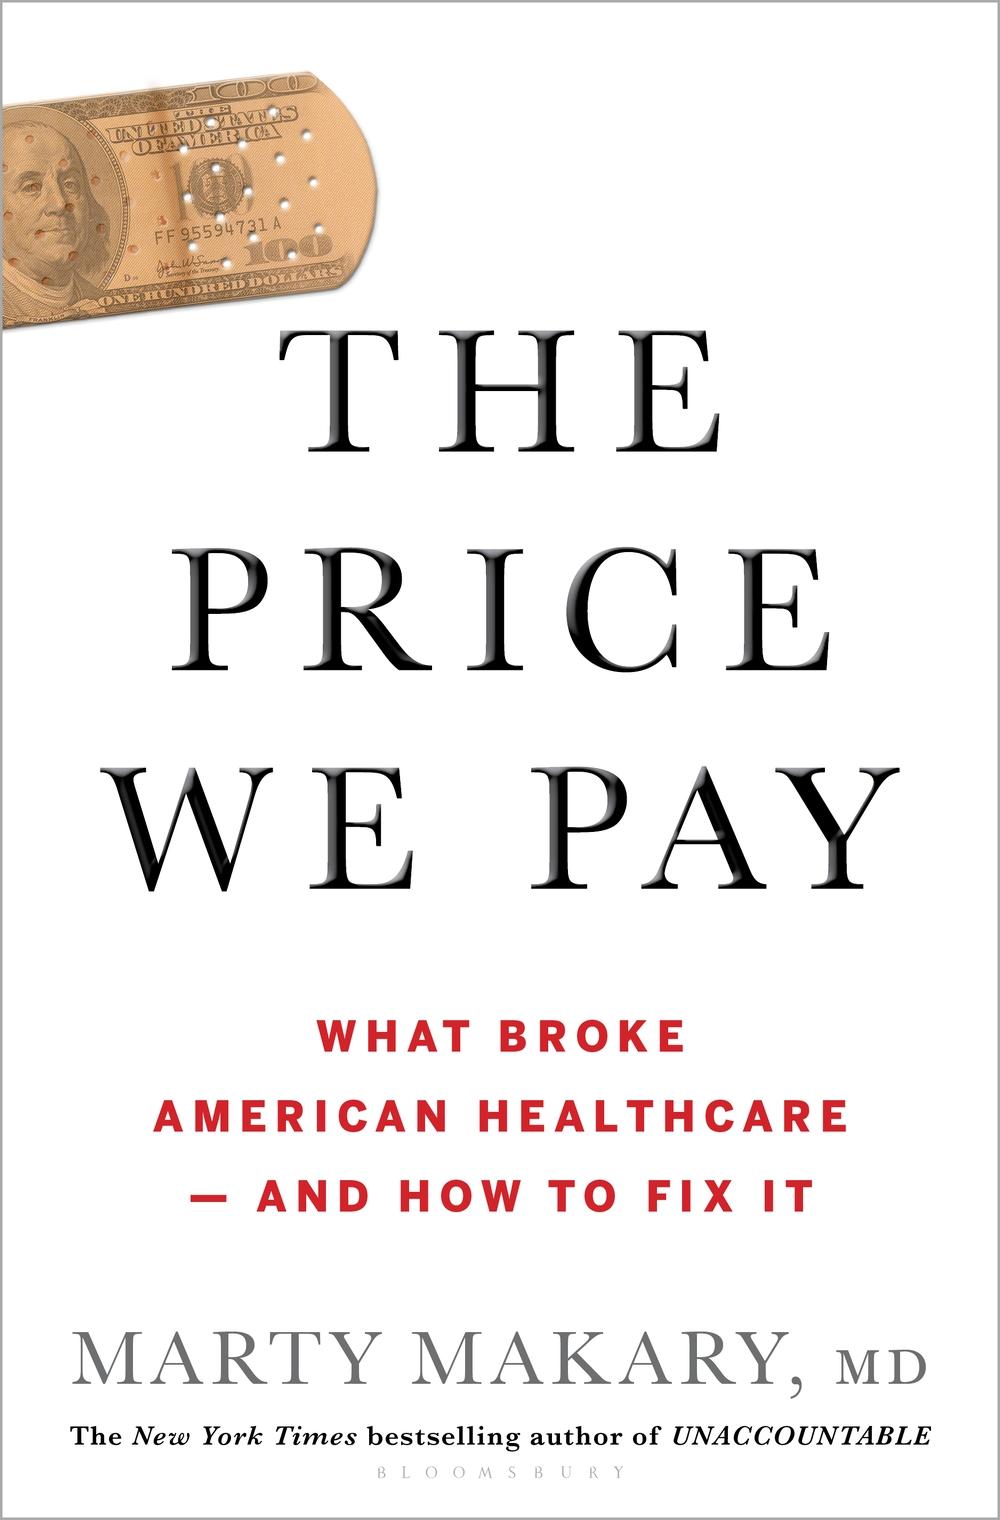 Price We Pay - Marty Makary